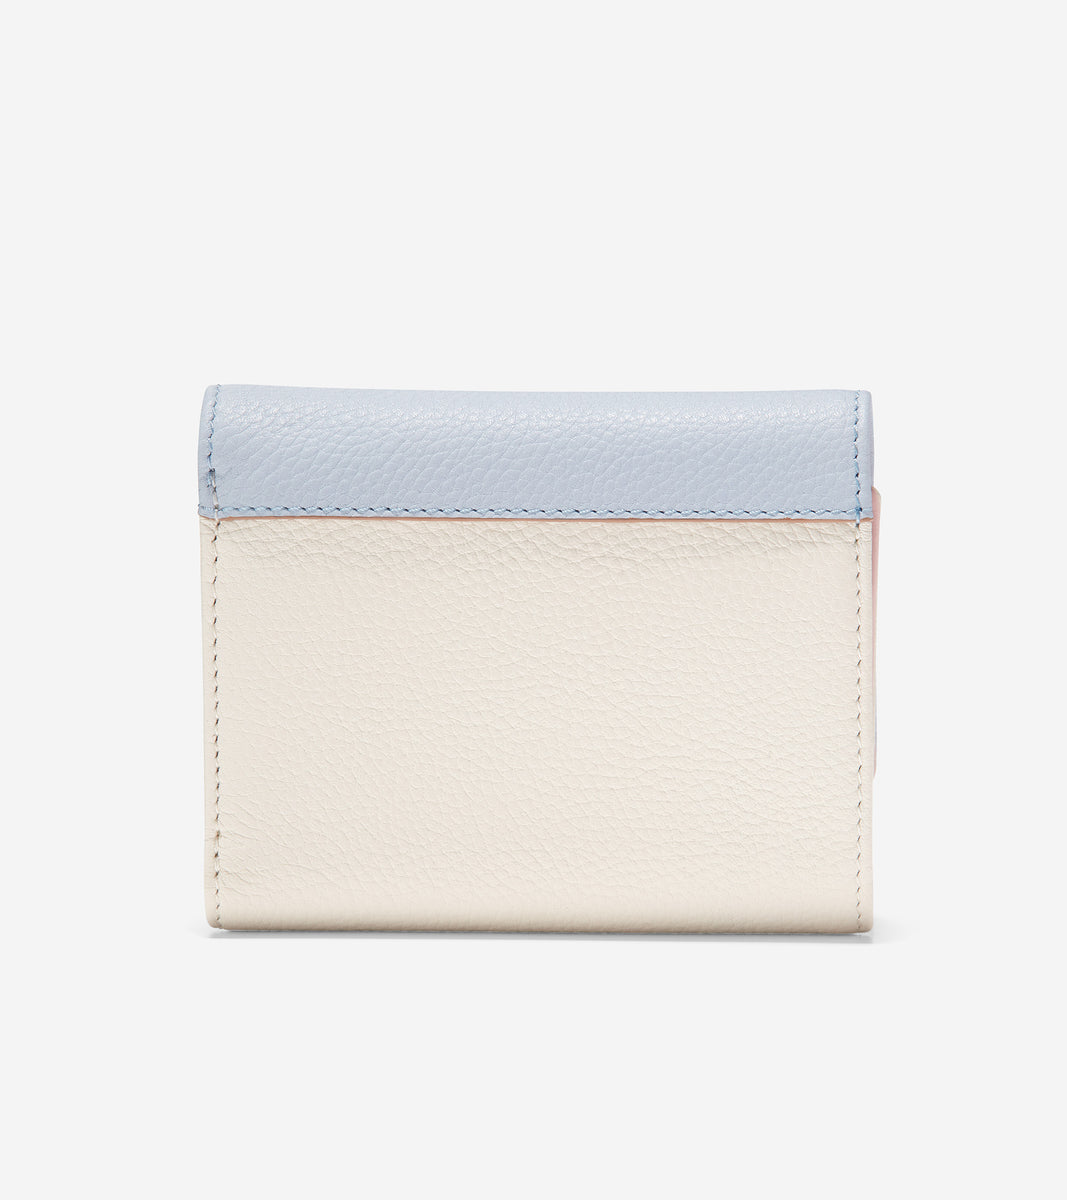 u06220-Small Trifold Wallet-Pastel Colorblock Leather